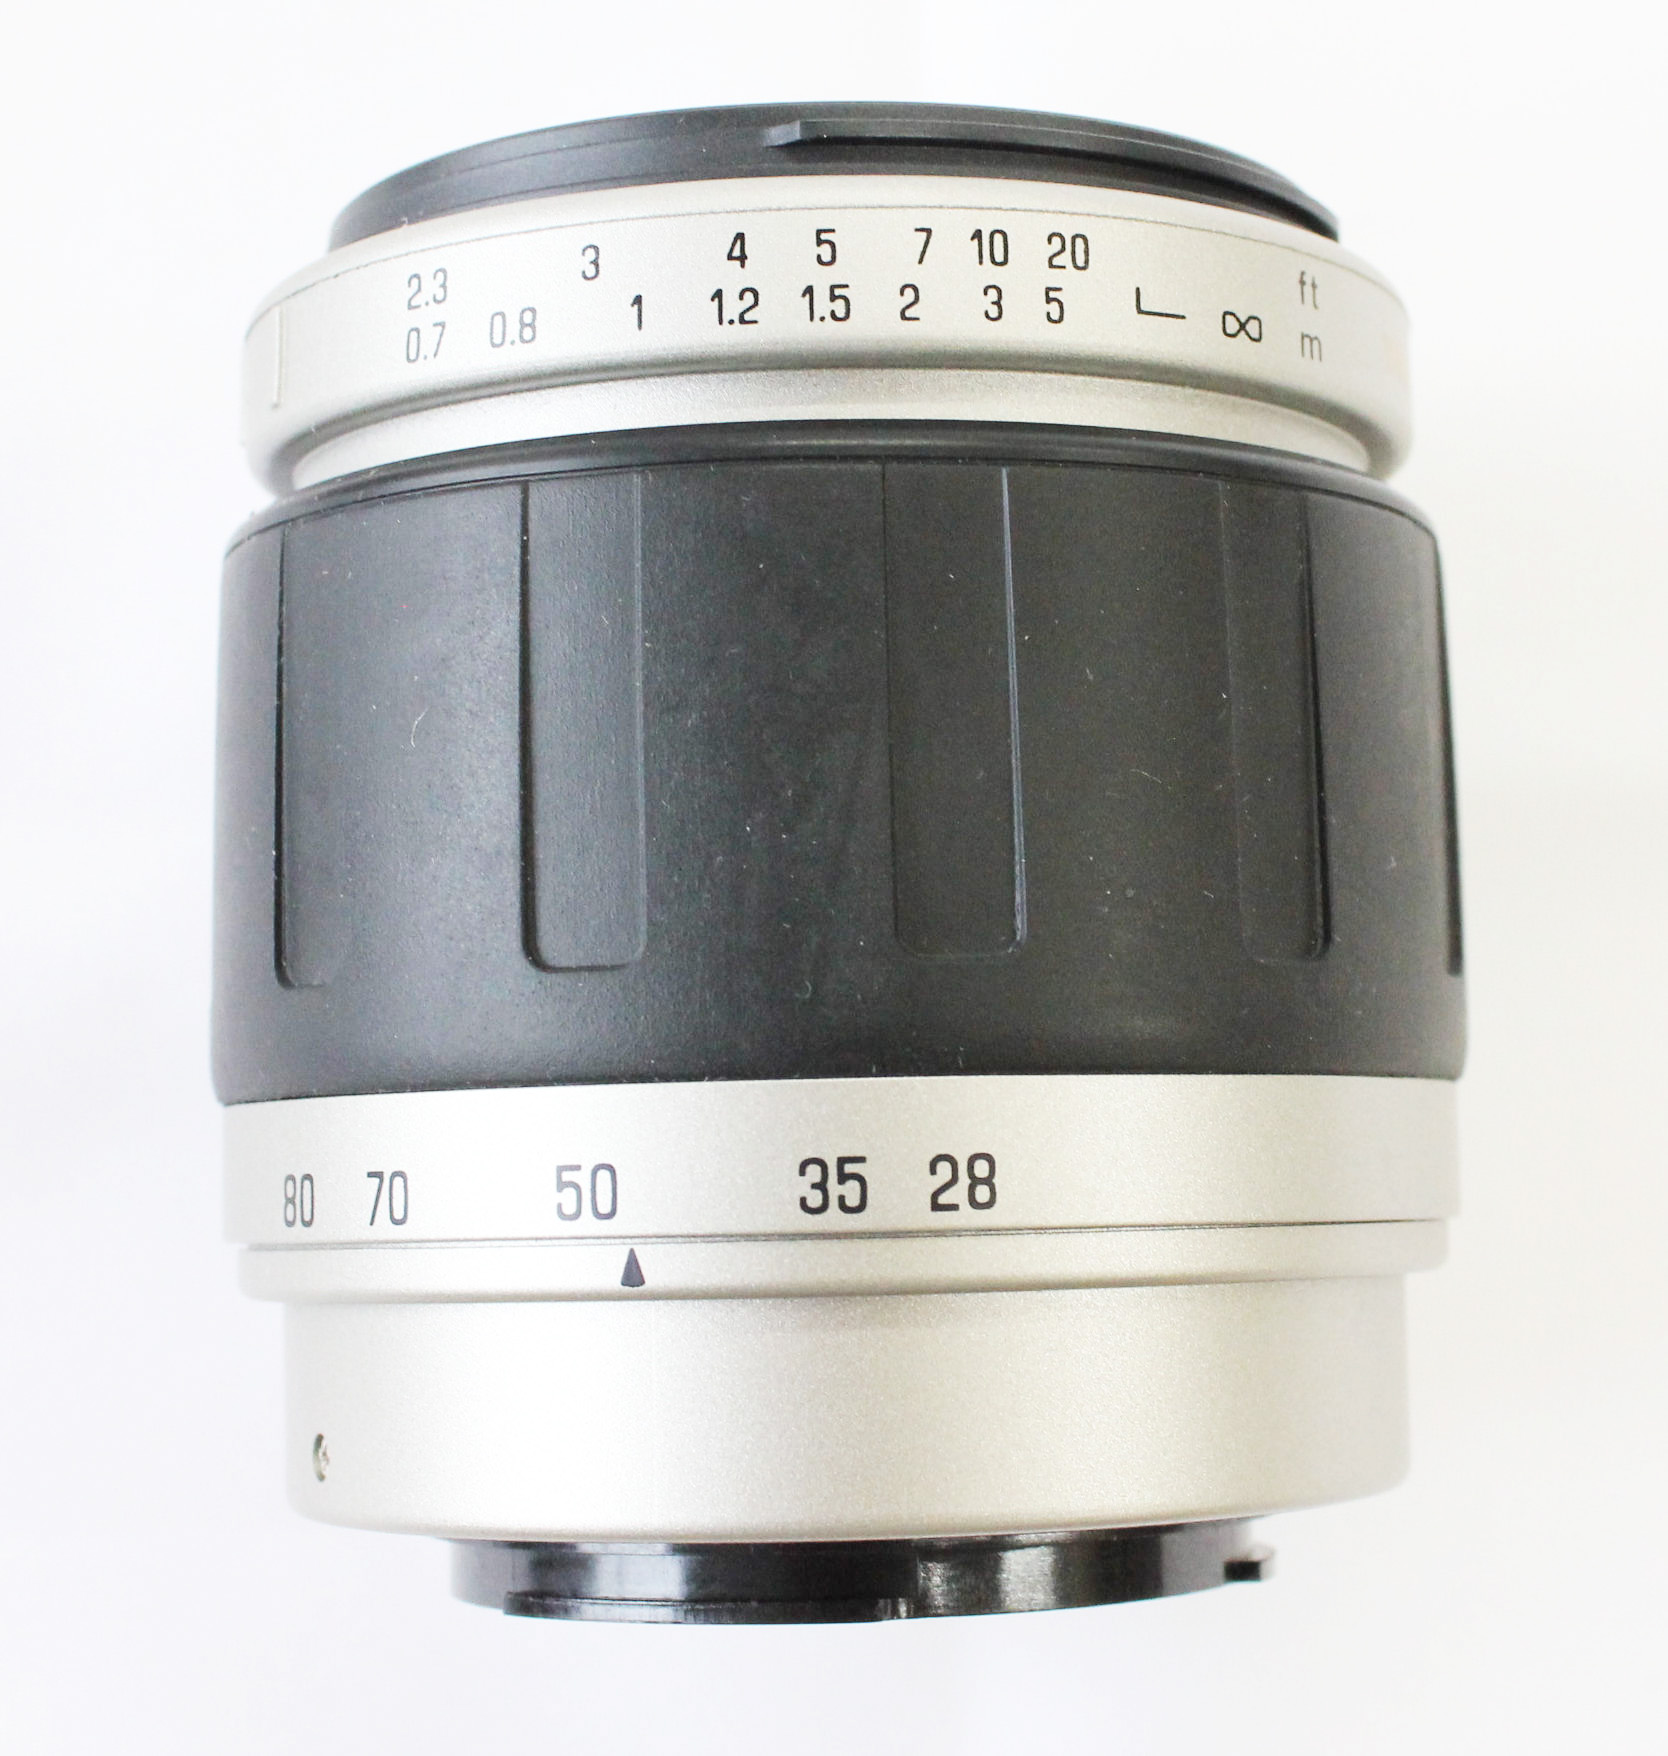  Tamron AF 28-80mm F/3.5-5.6 Lens with Hood for Minolta/Sony A Mount from Japan Photo 7